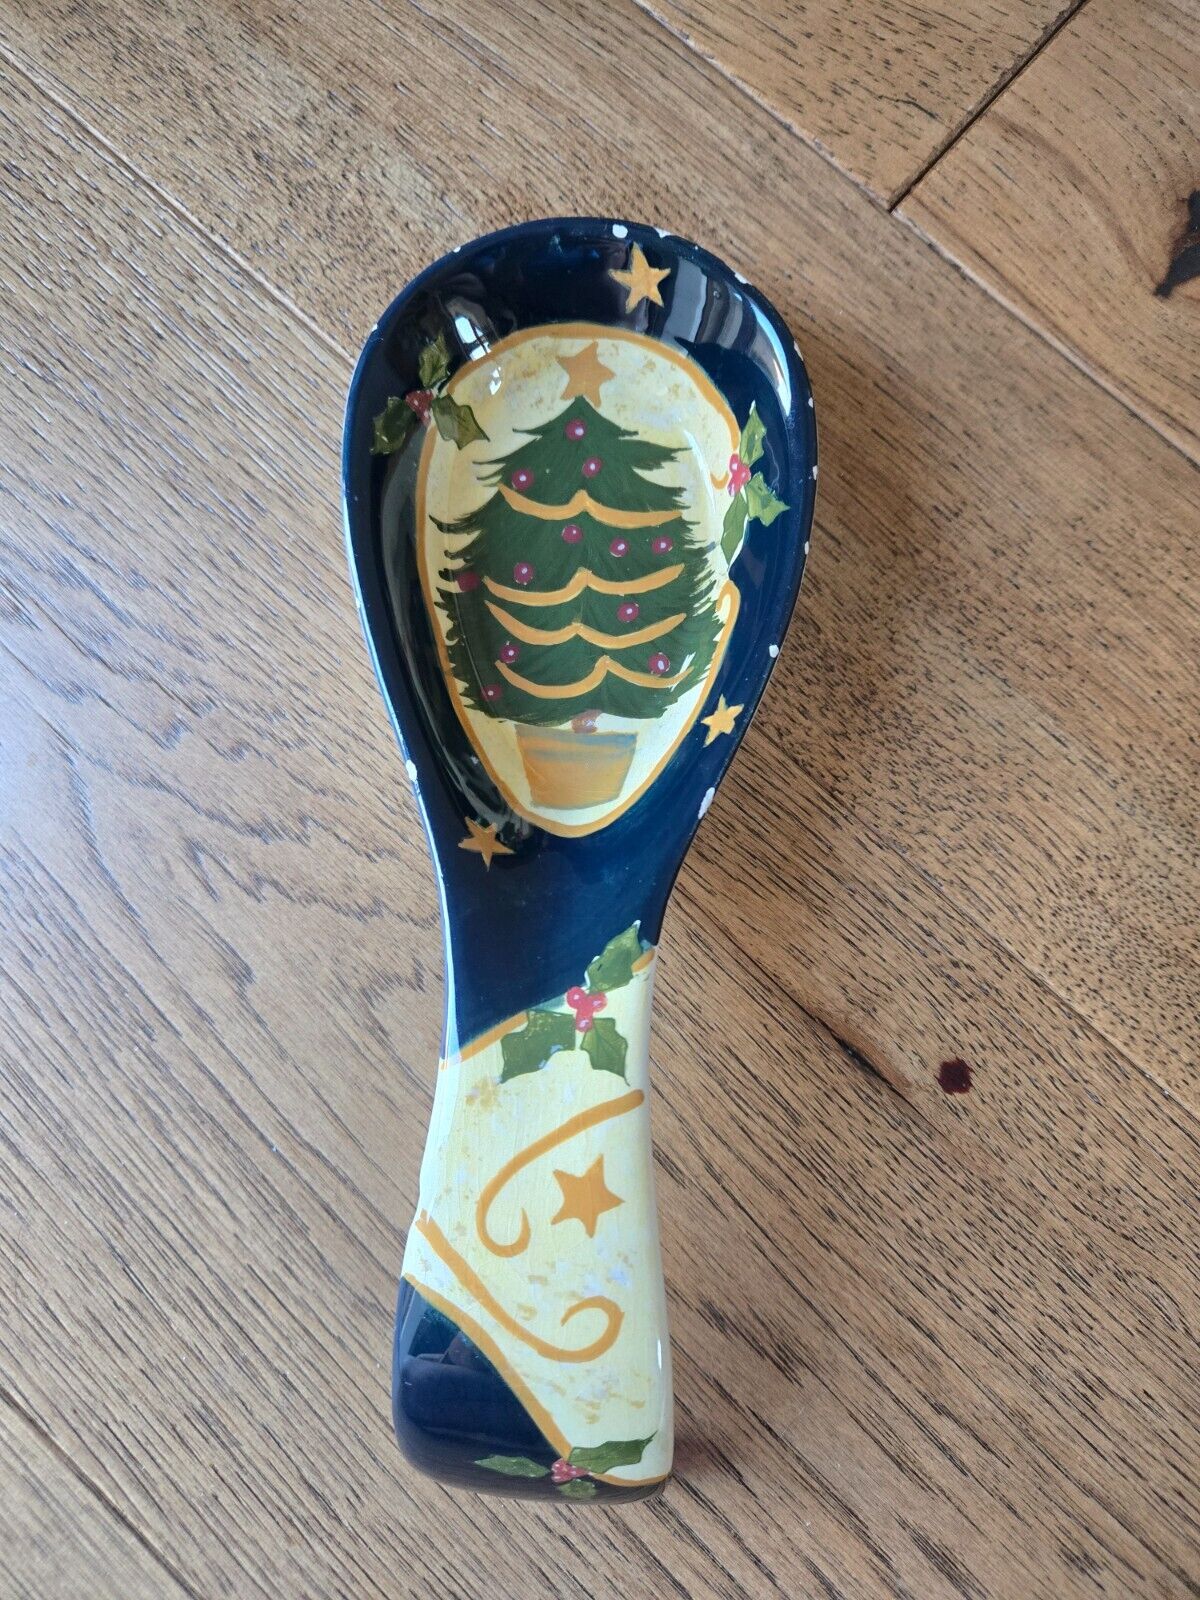 Lang Earthenware Susan Winget Spoon rest-The Night Before Christmas 2001